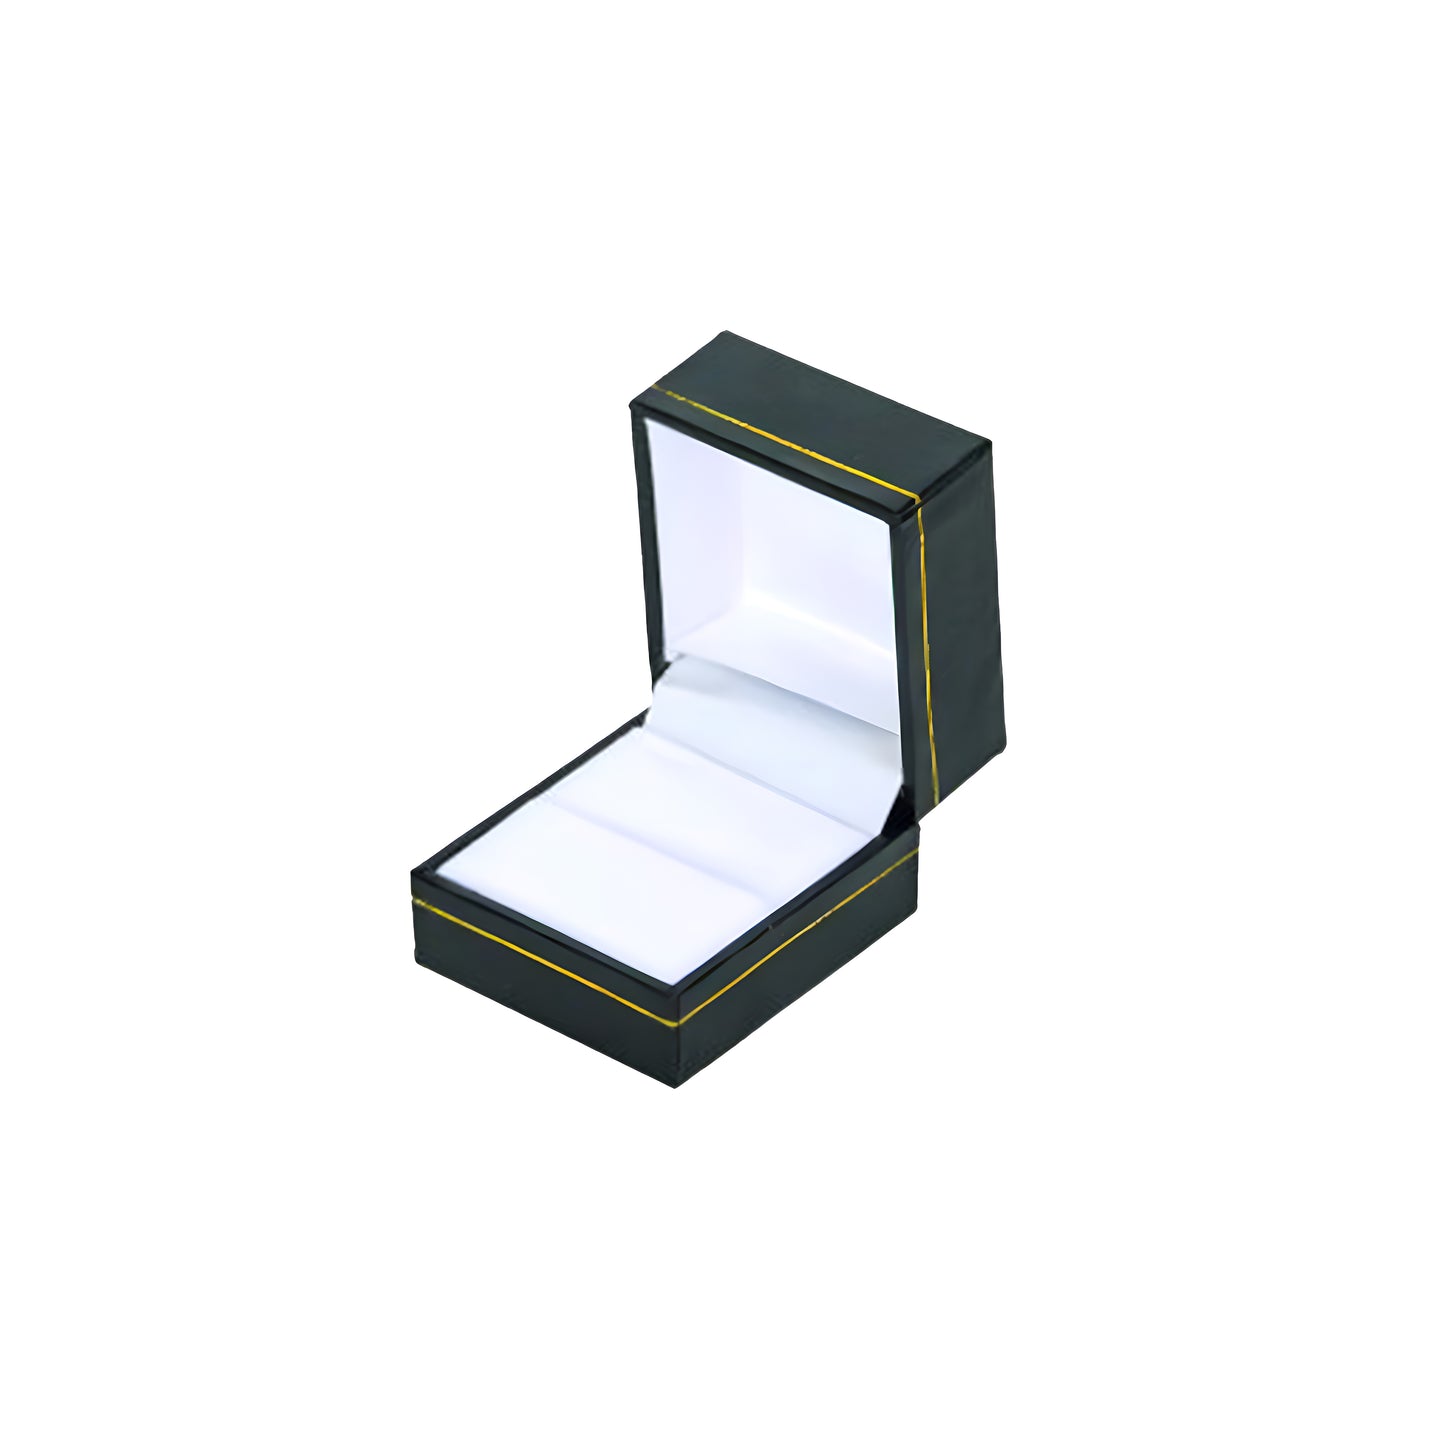 Milano Leatherette Ring Boxes (Pack of 12)